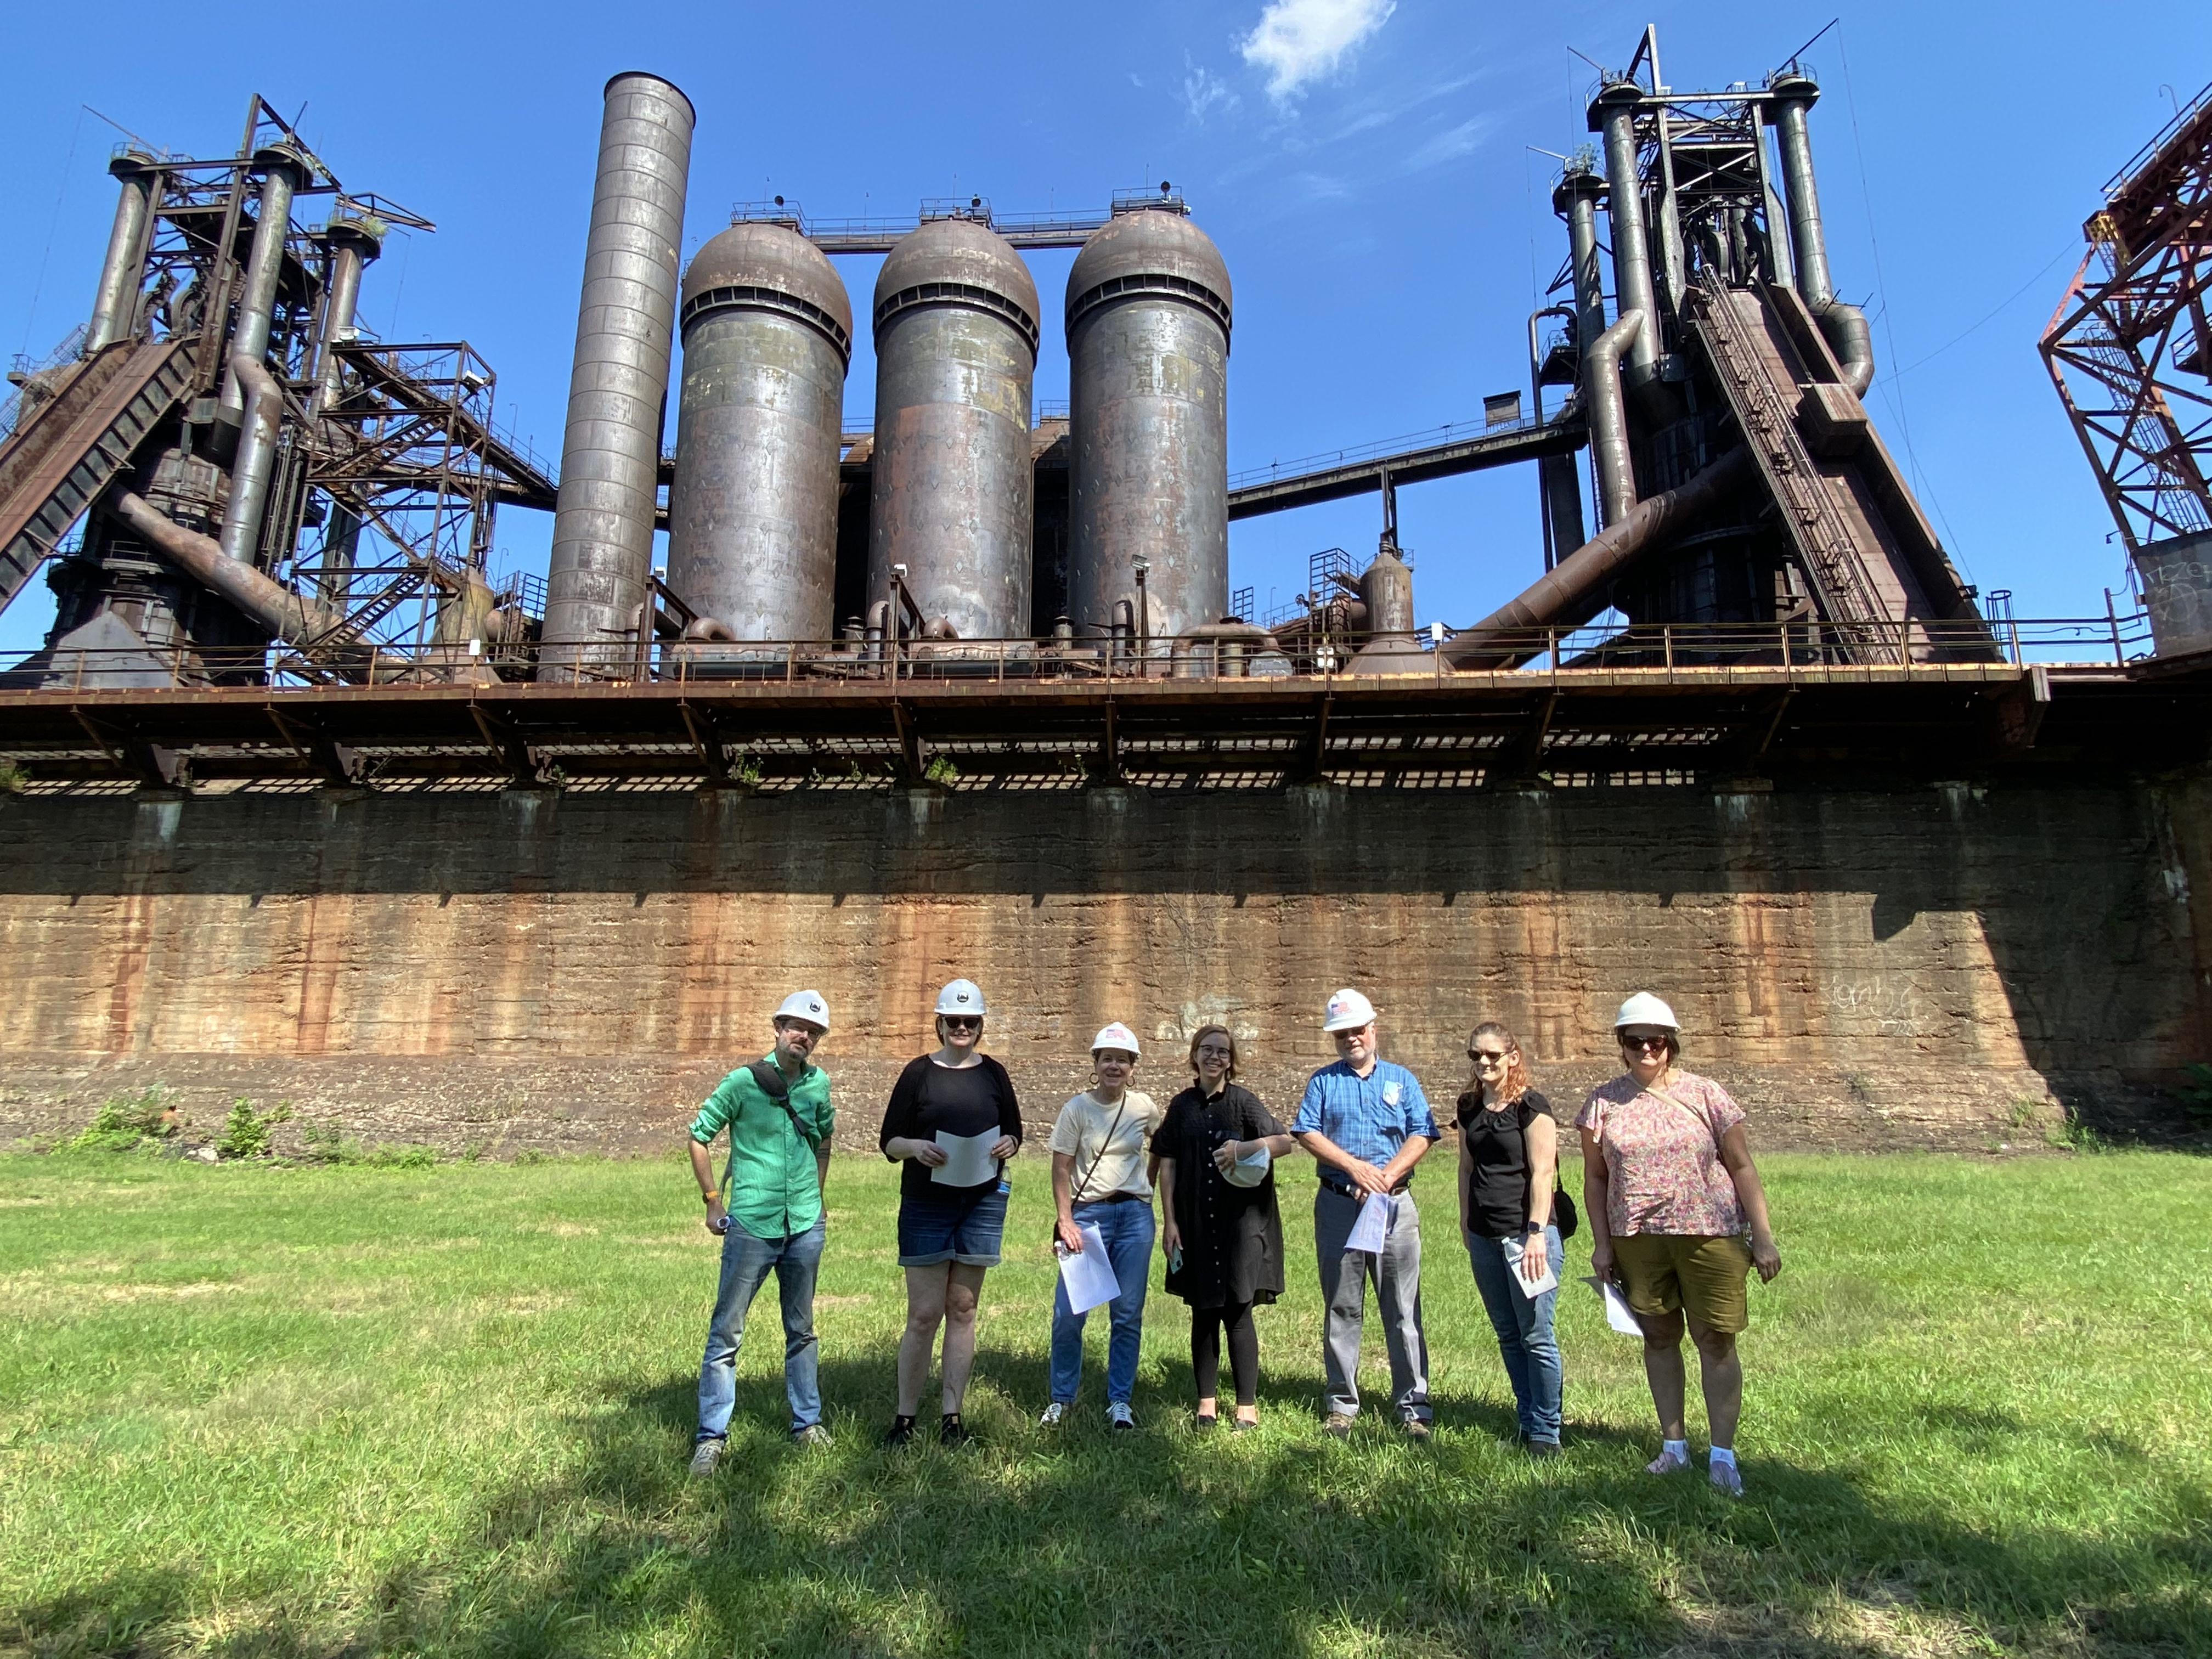 Six people in construction hats standing outdoors in front of a brown furnace